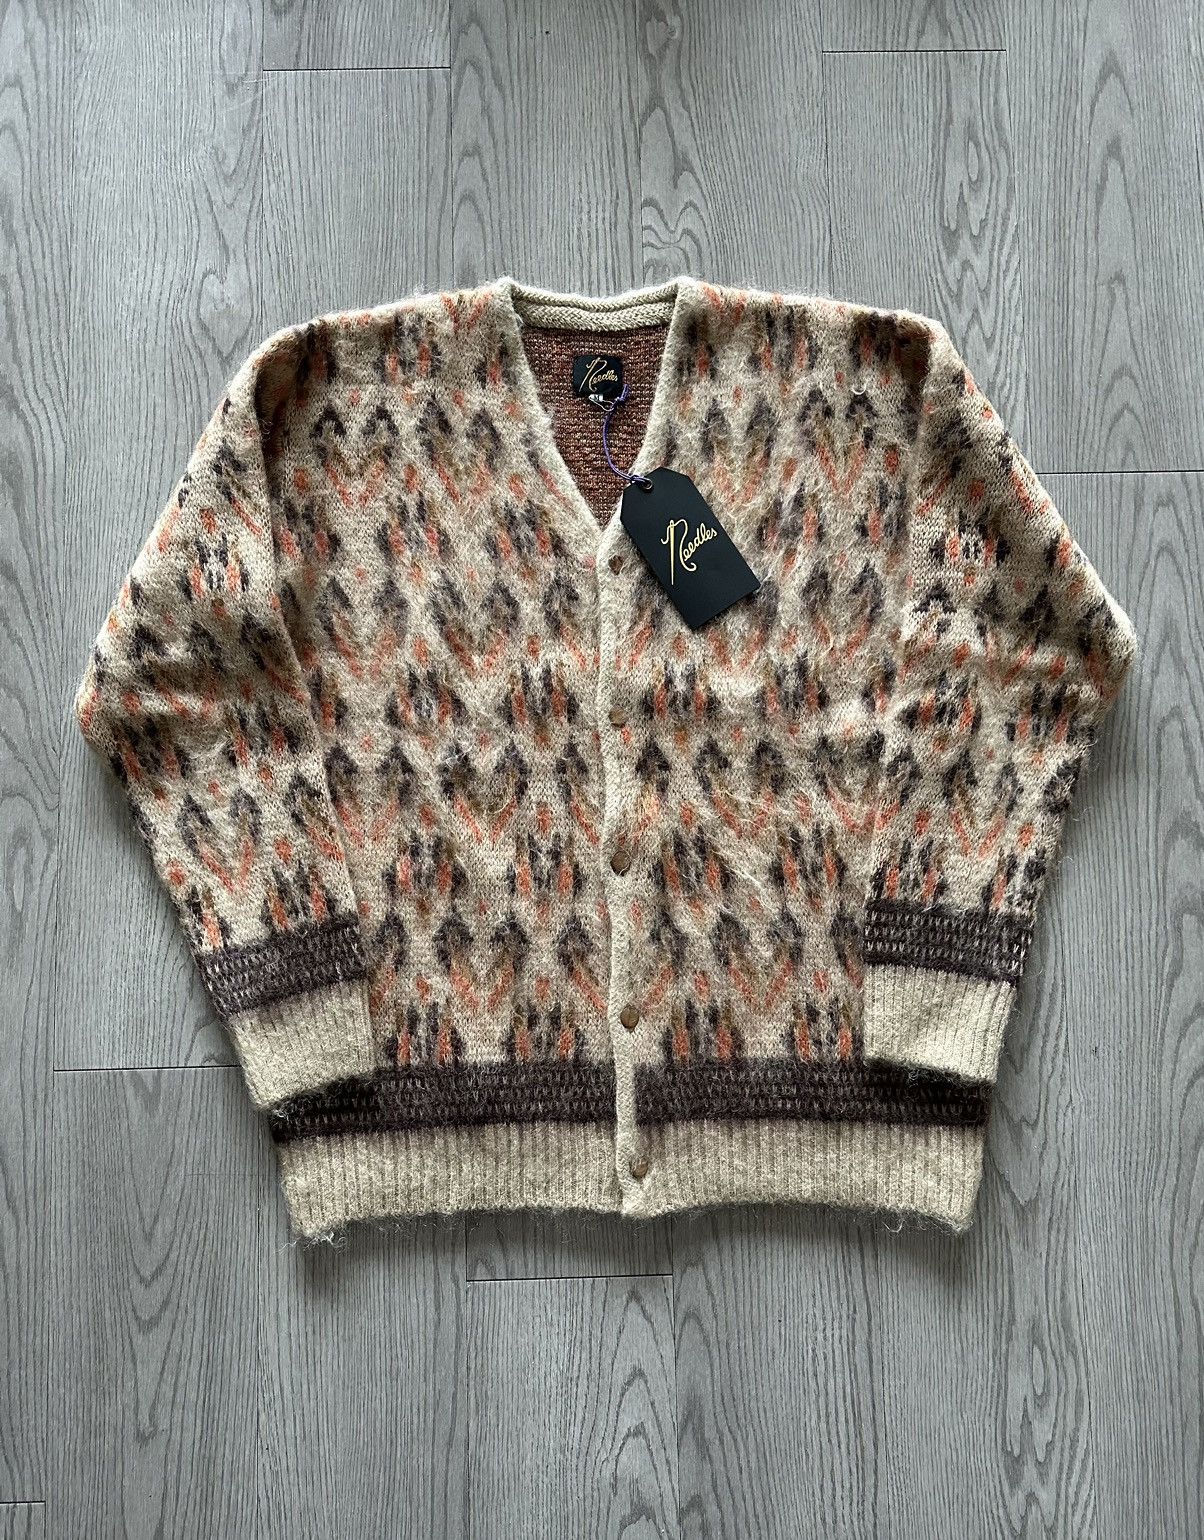 Needles Needles Mohair Cardigan Sweater Beige Jacquard Butterfly | Grailed